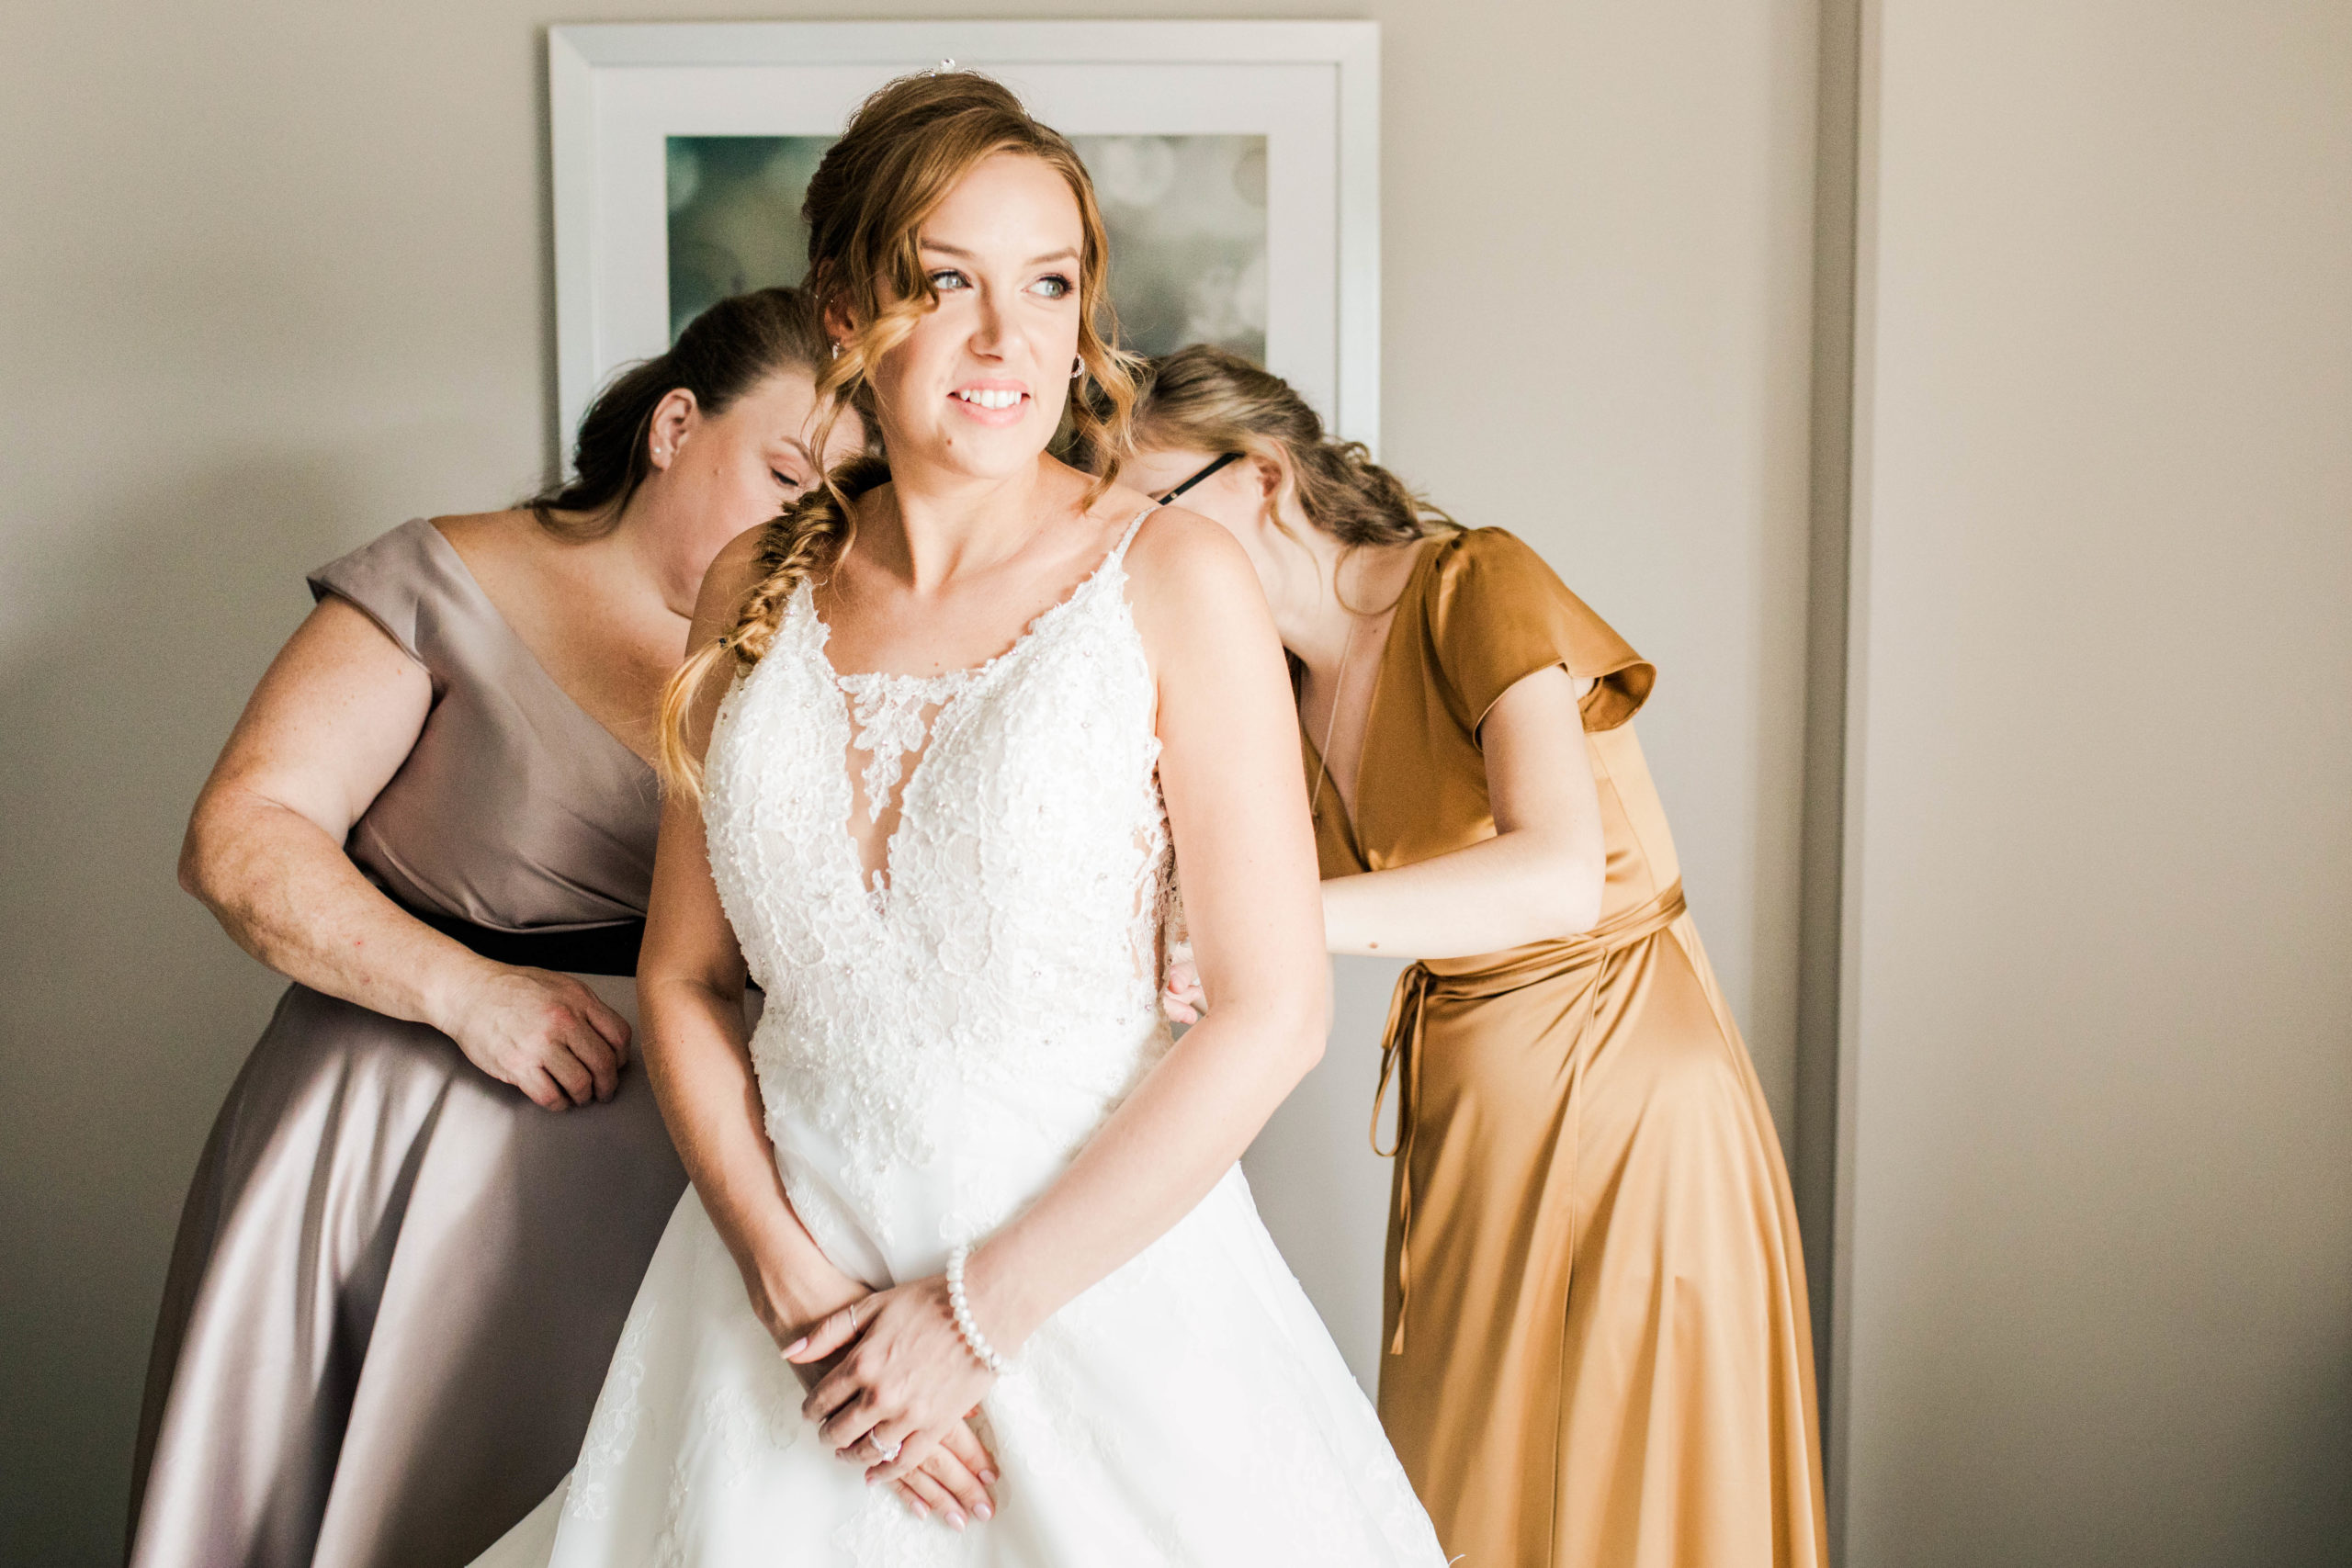 A bride getting ready in an ideal space for some beautiful bridal photography.